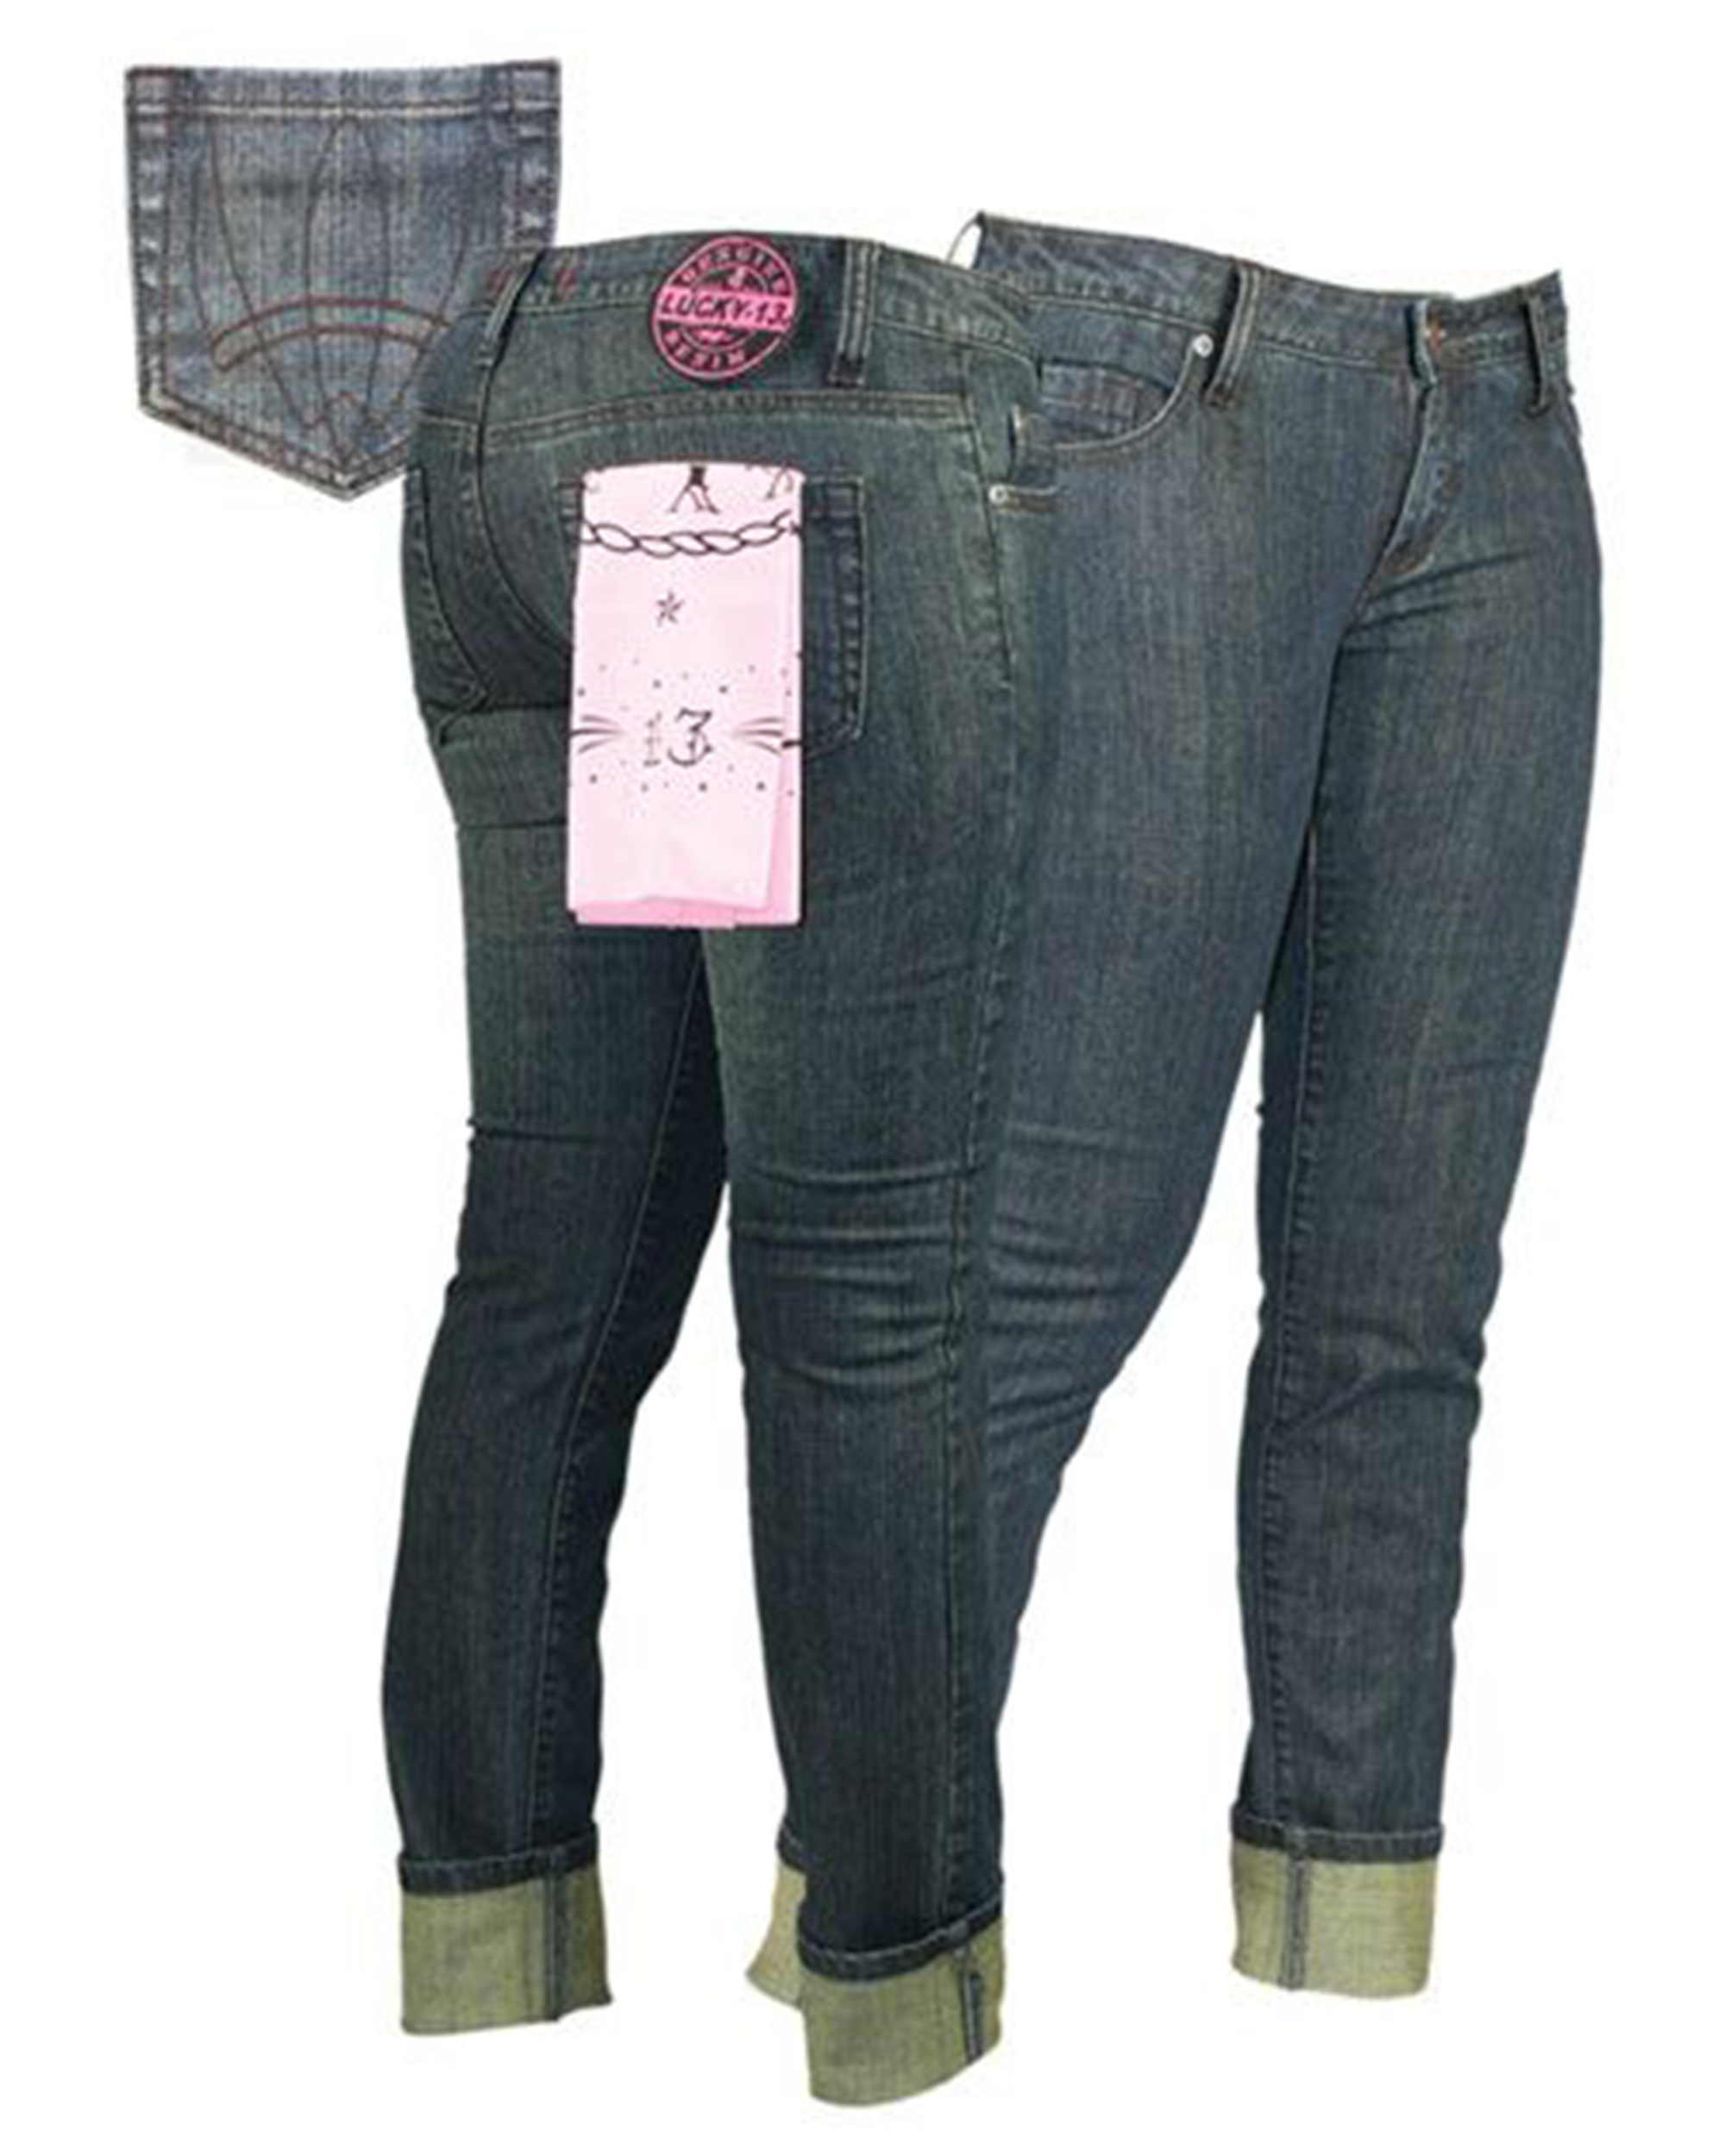 The BLINDSIDED Skinny Jeans - SIZES 5 & 7 ONLY! 50% OFF!!!